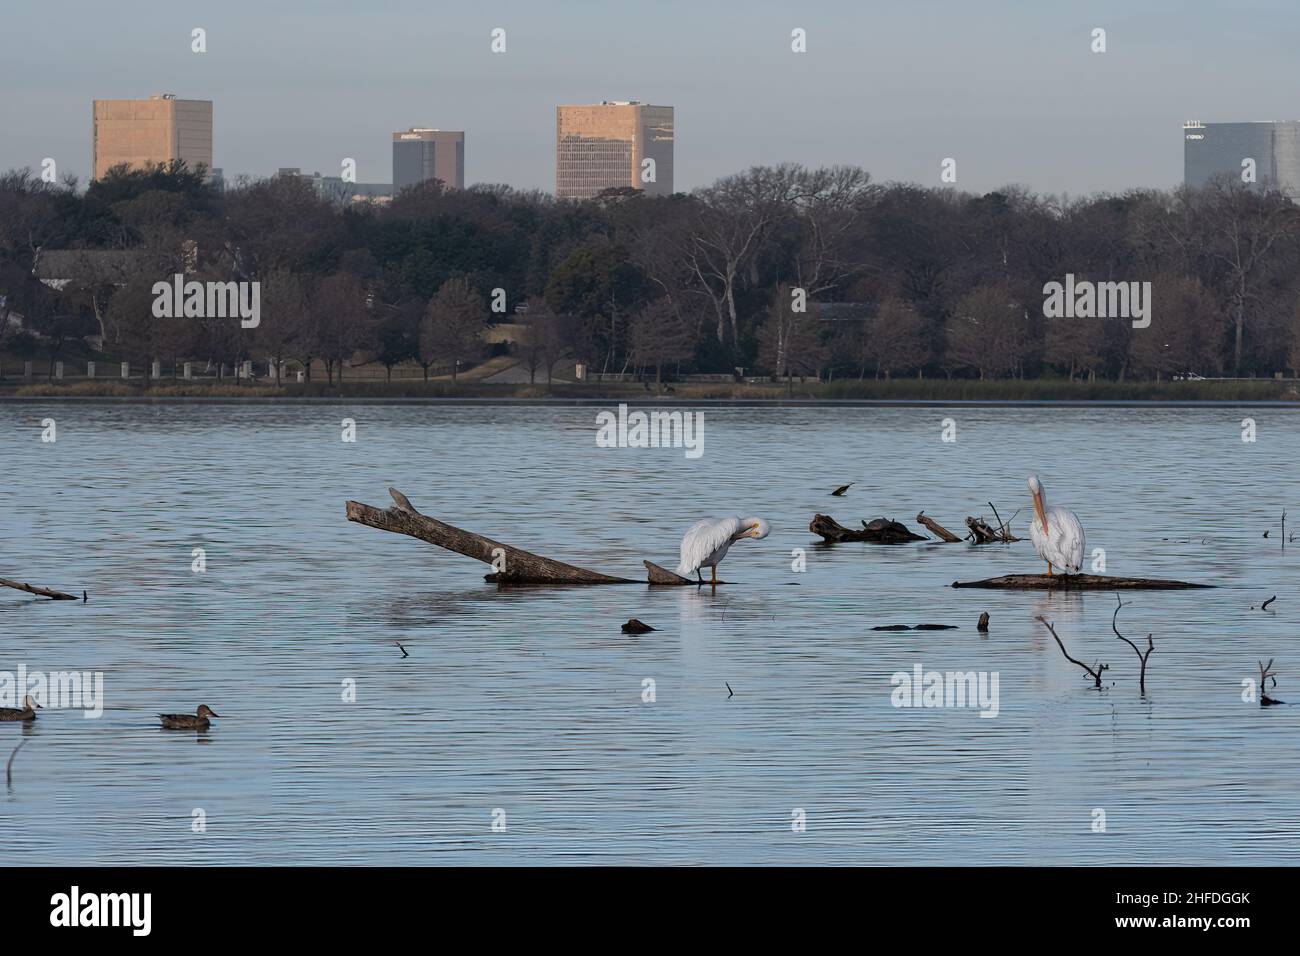 A pair of White Pelicans standing on submerged logs in White Rock Lake and preening their feathers with some skyscrapers and office buildings behind. Stock Photo